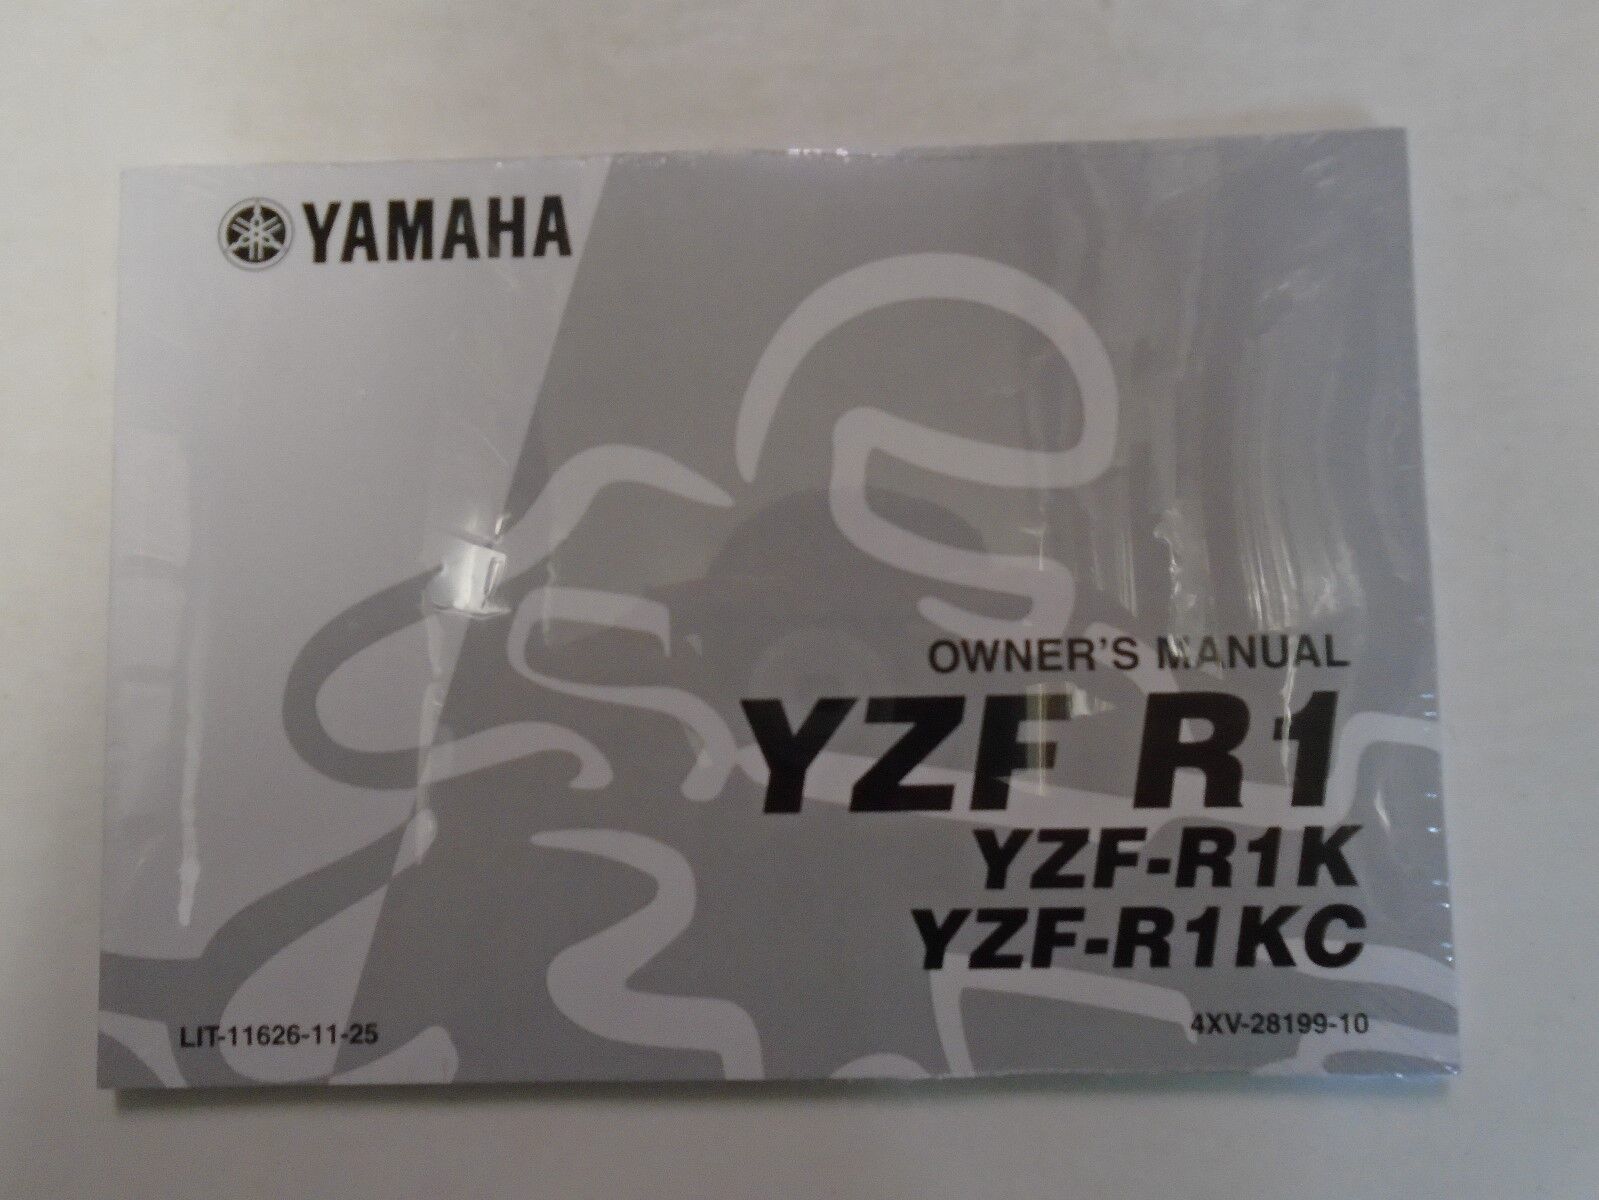 Primary image for 1998 Yamaha YZF-R1K YZF R1K Owners Owner Operators Manual 4XV-28199-70 NEW